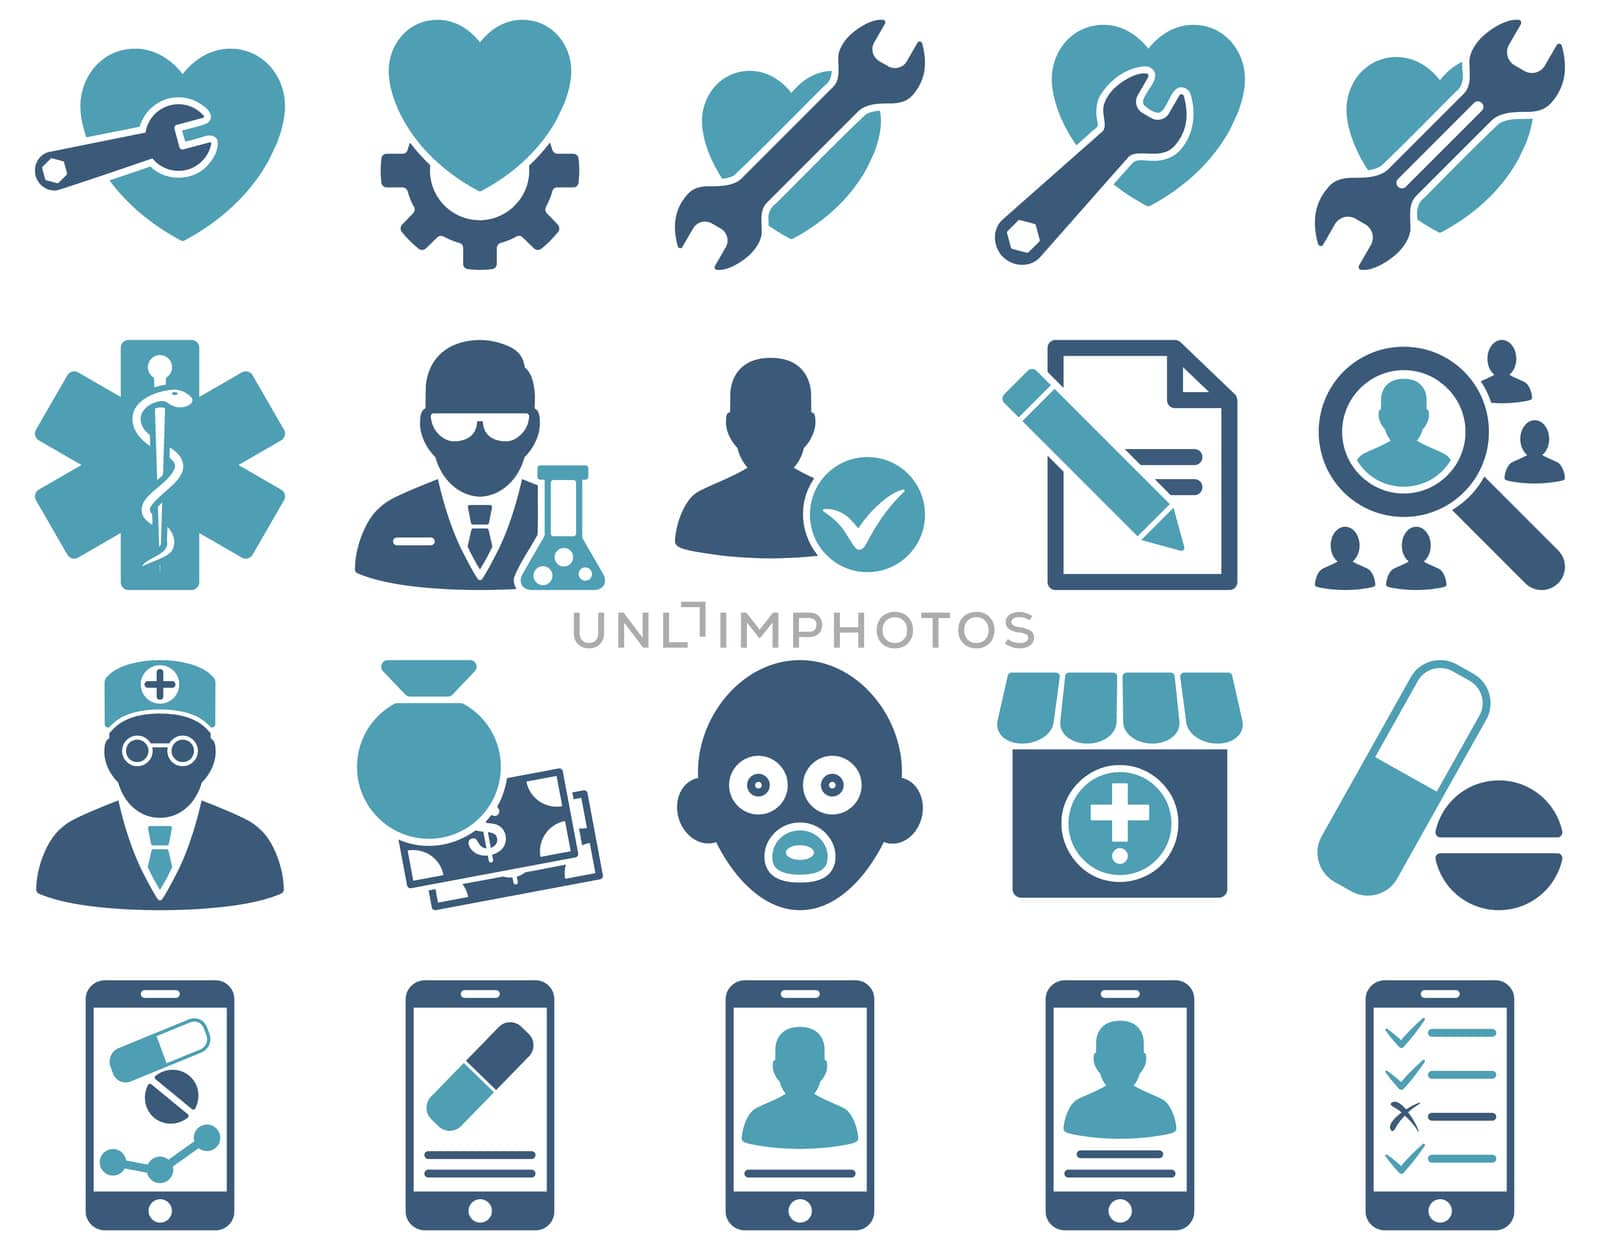 Medical icon set. Style: bicolor icons drawn with cyan and blue colors on a white background.